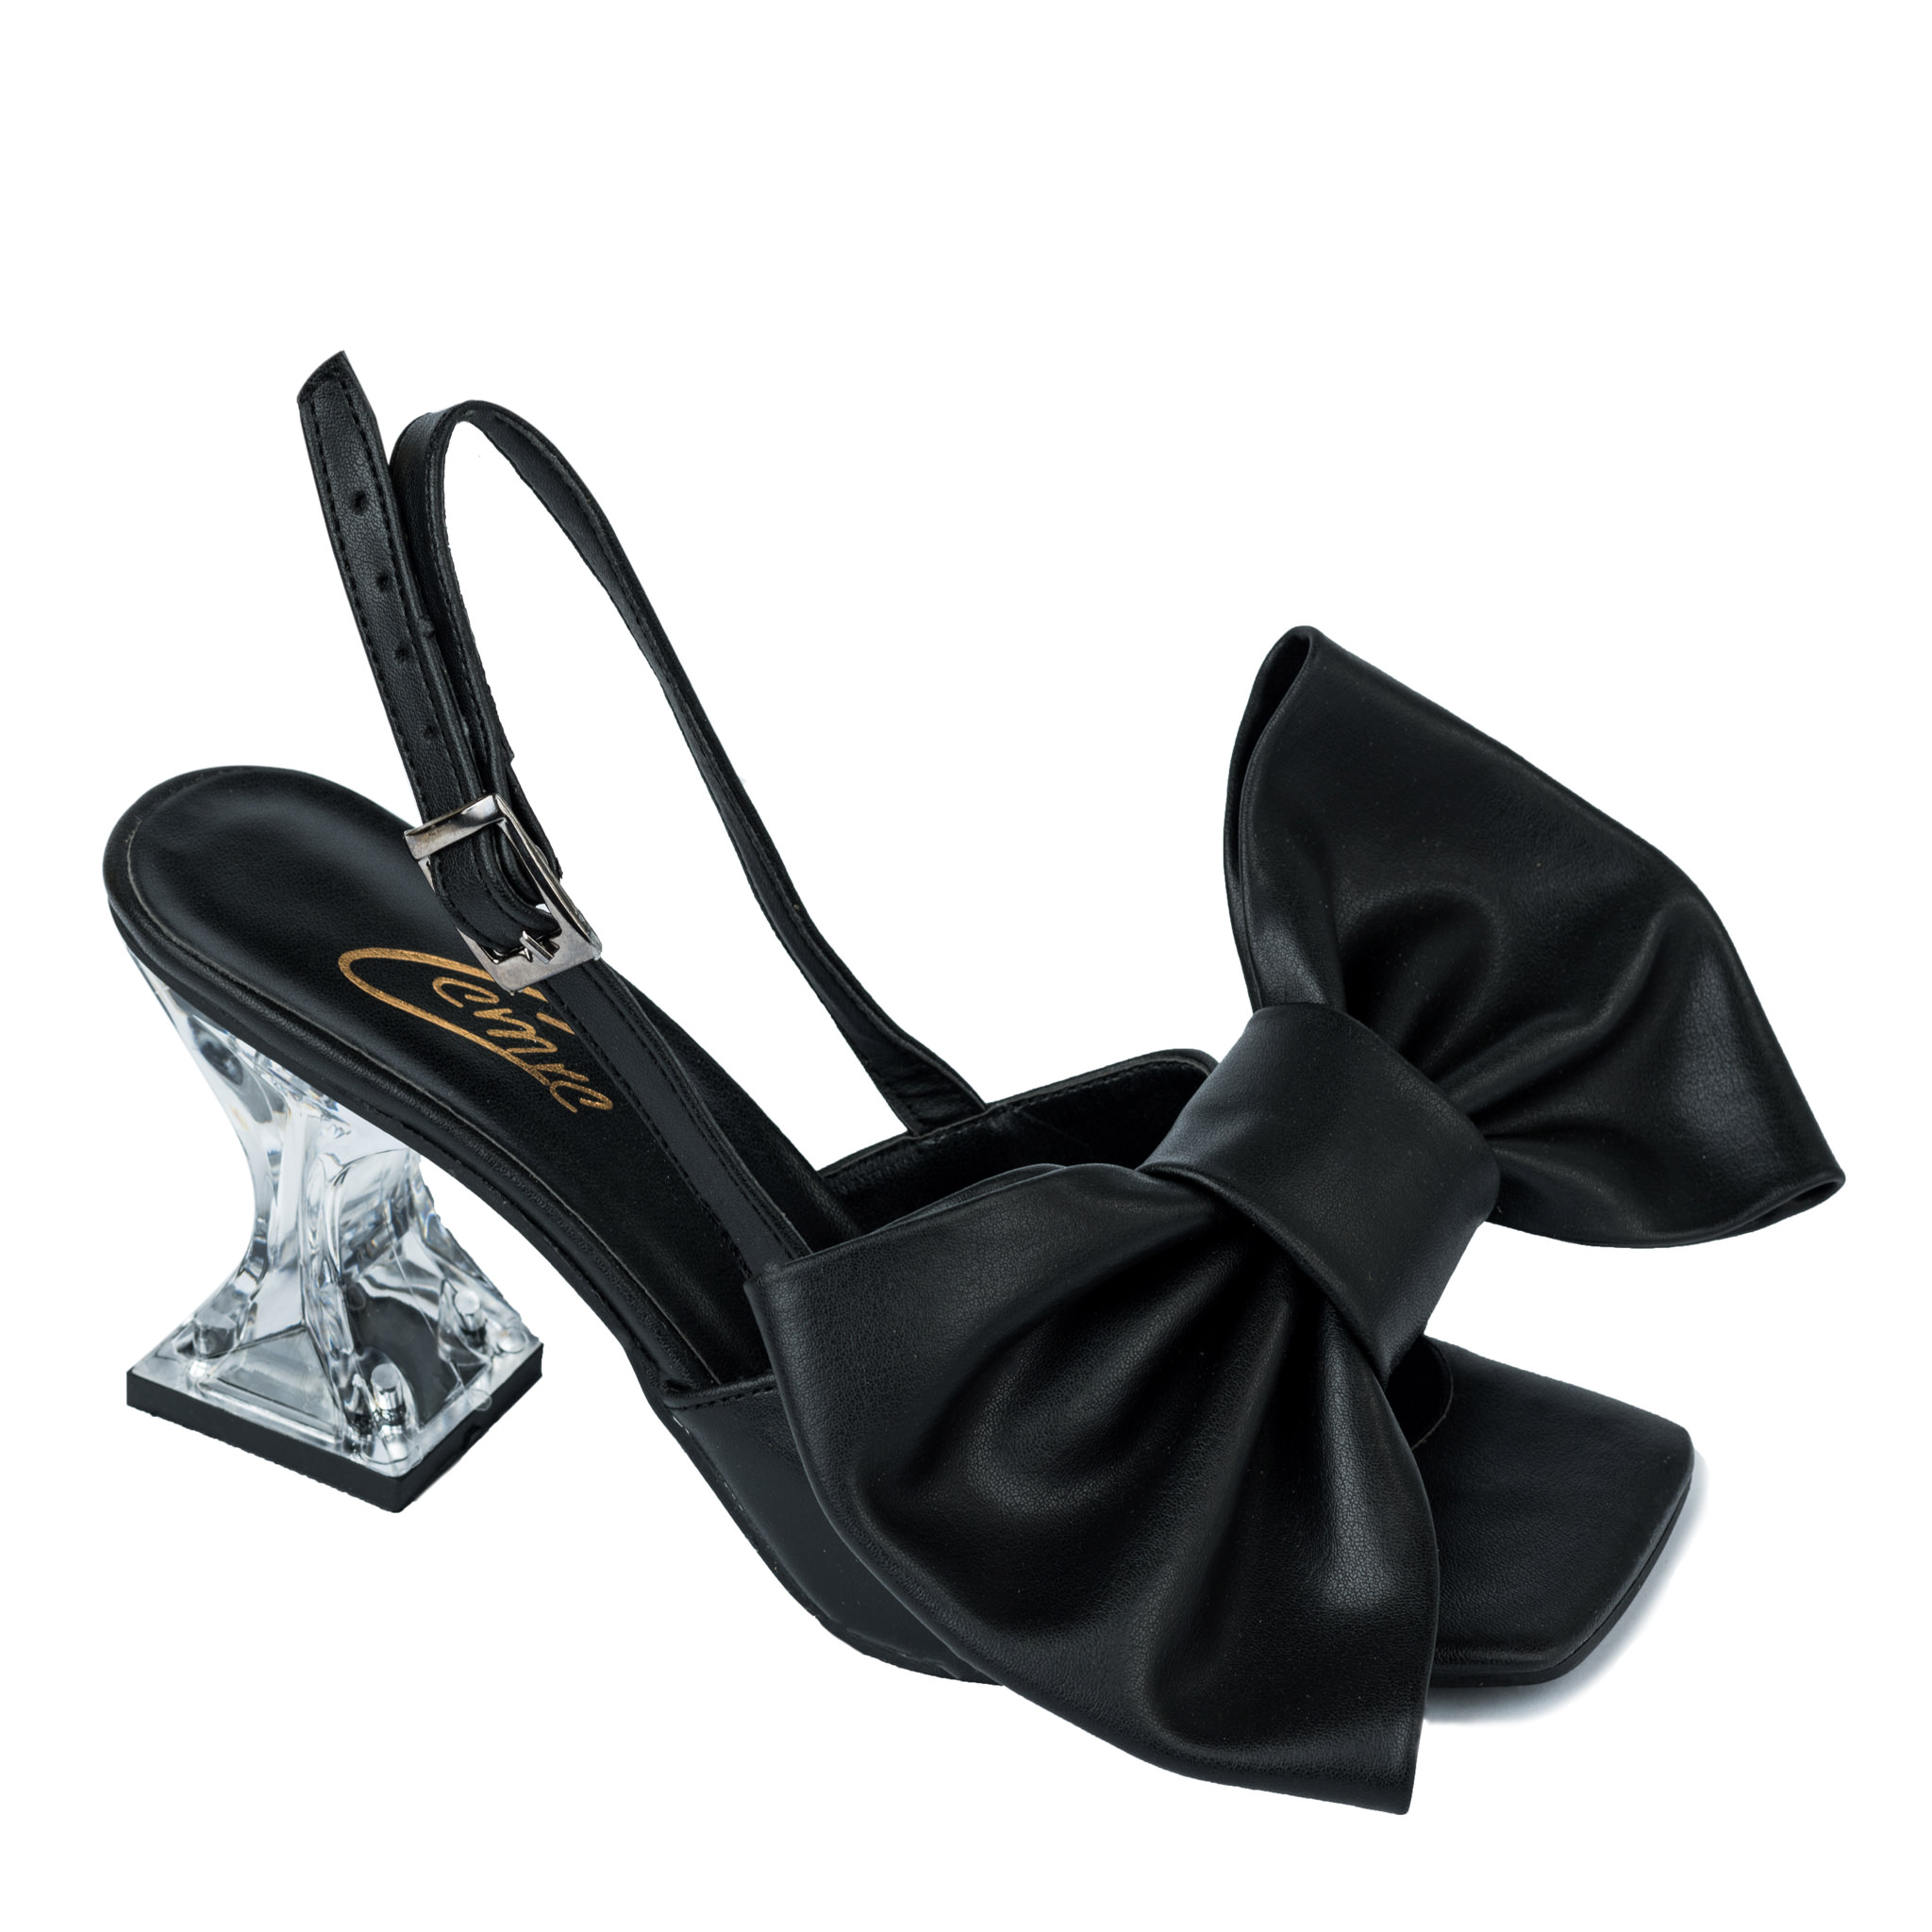 SANDALS WITH CLEAR HEEL AND BOW - BLACK